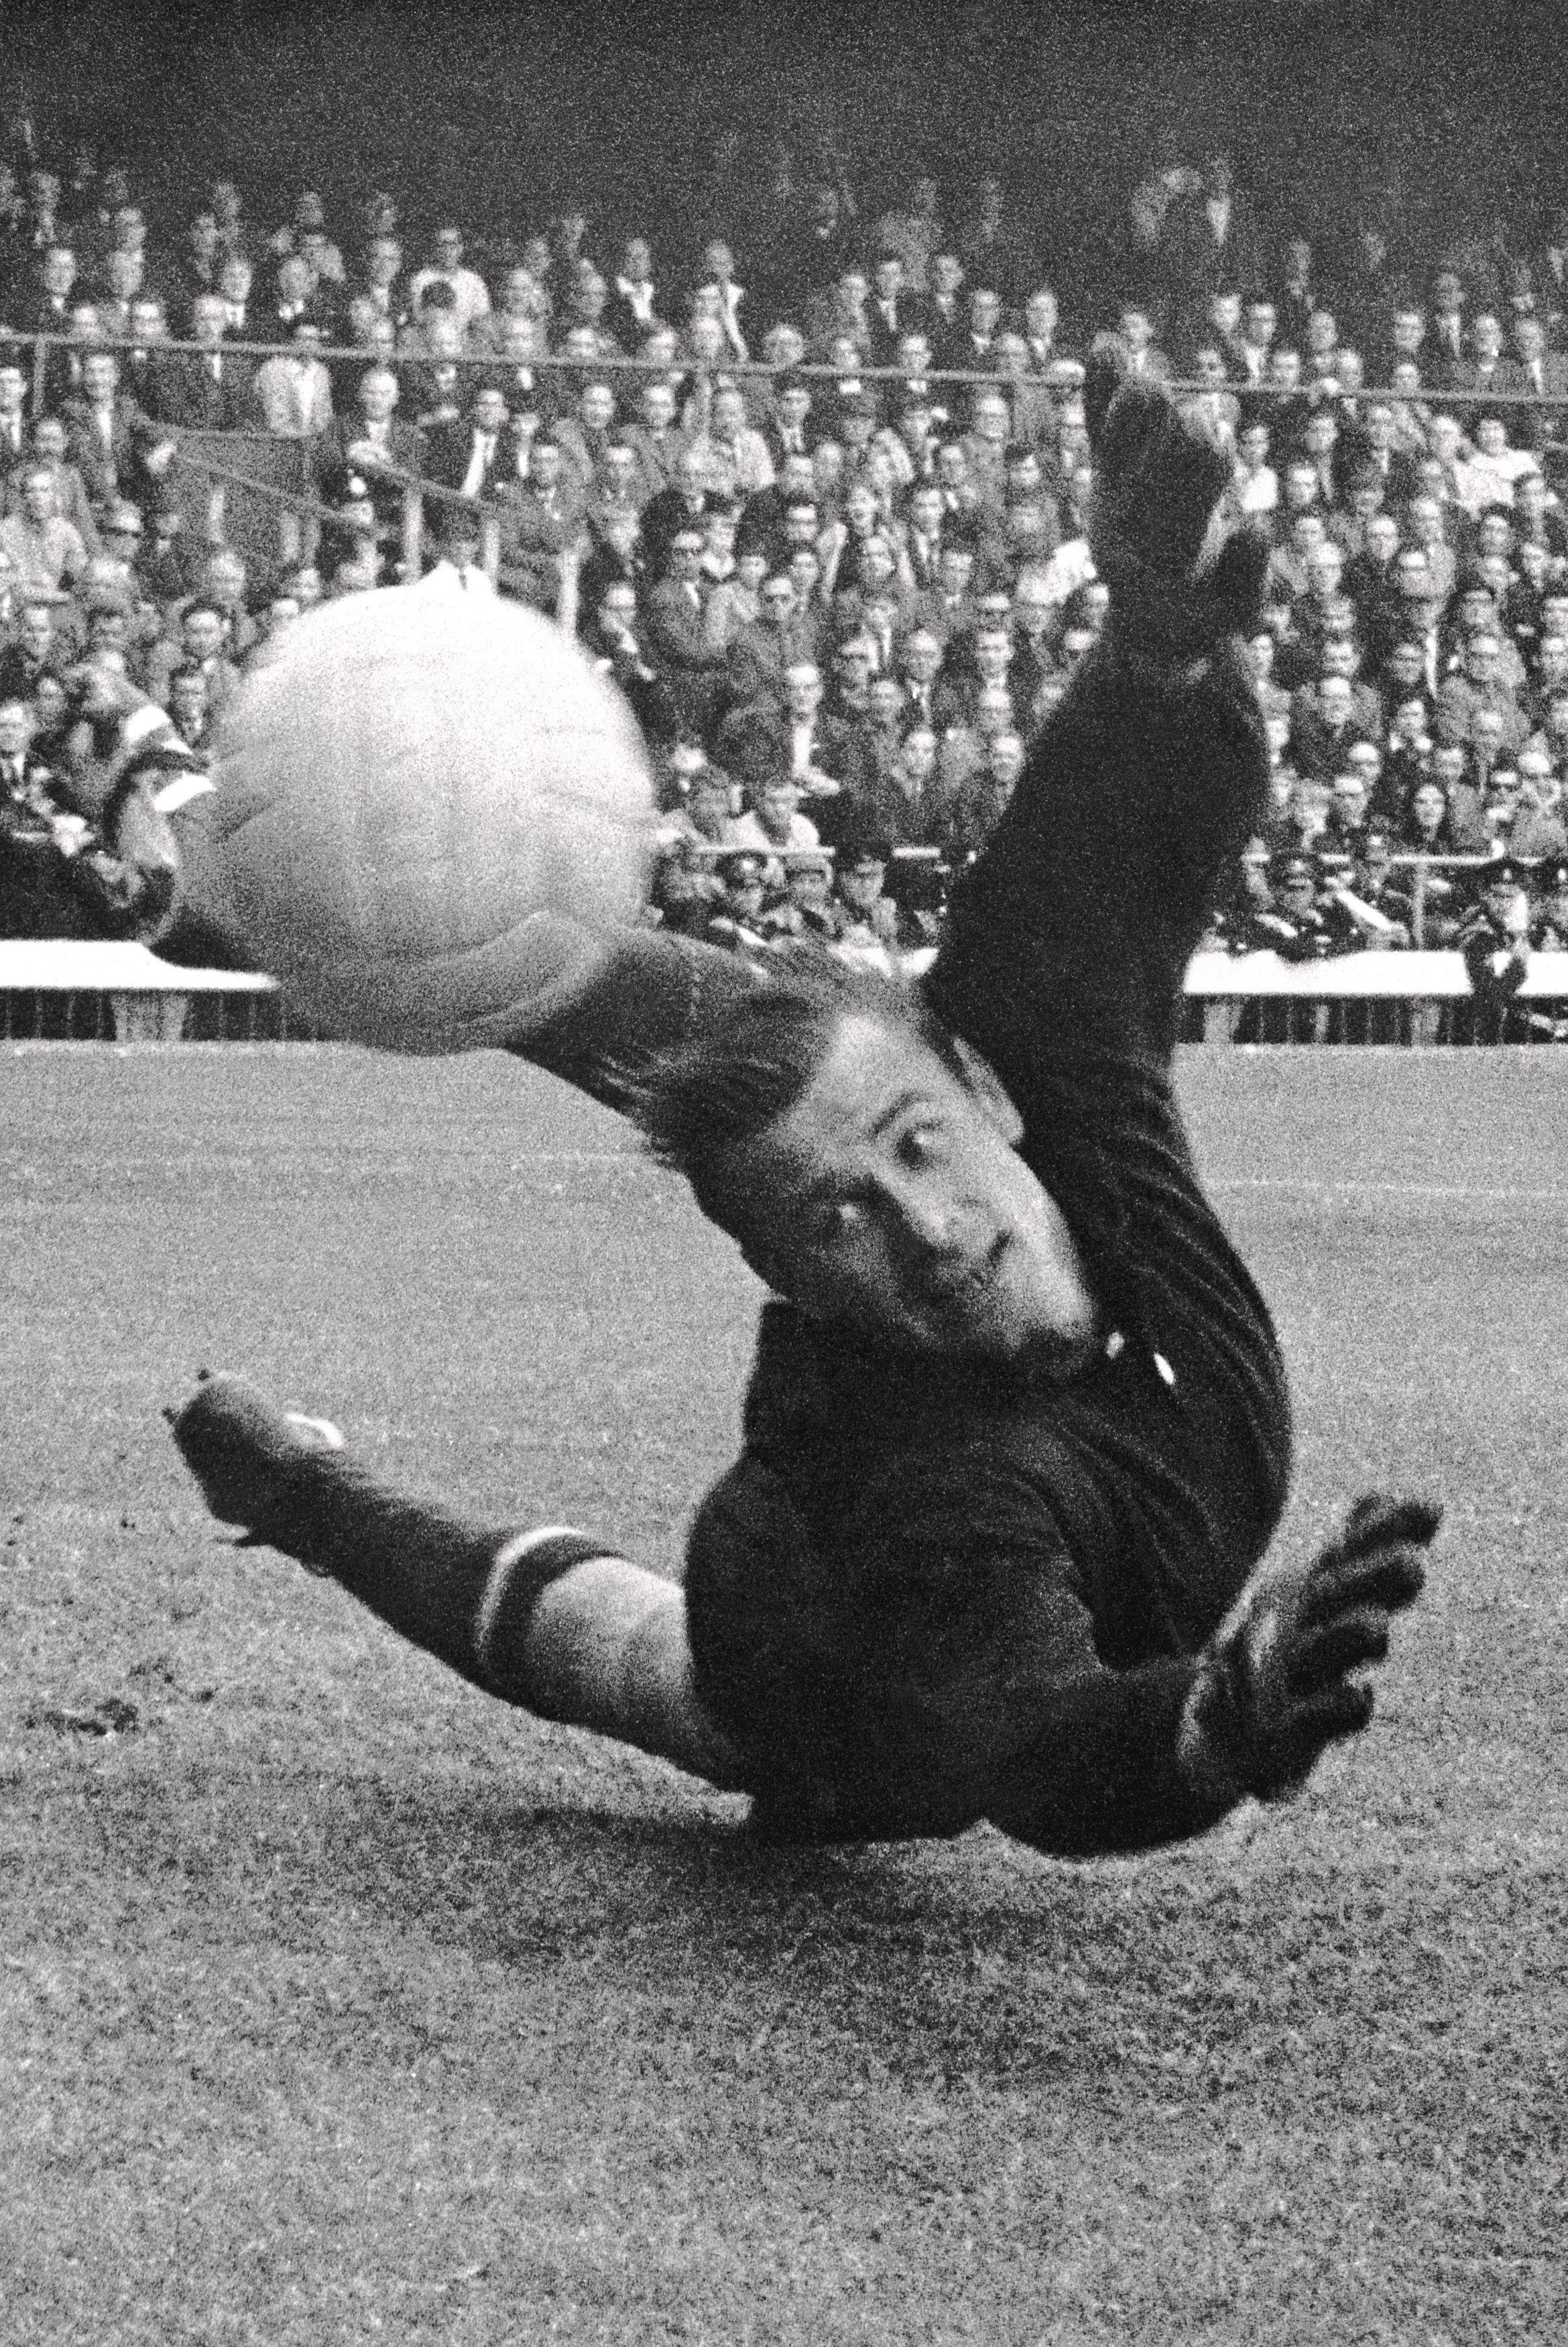 Who was Lev Yashin, and why is he on the World Cup 2018 poster?